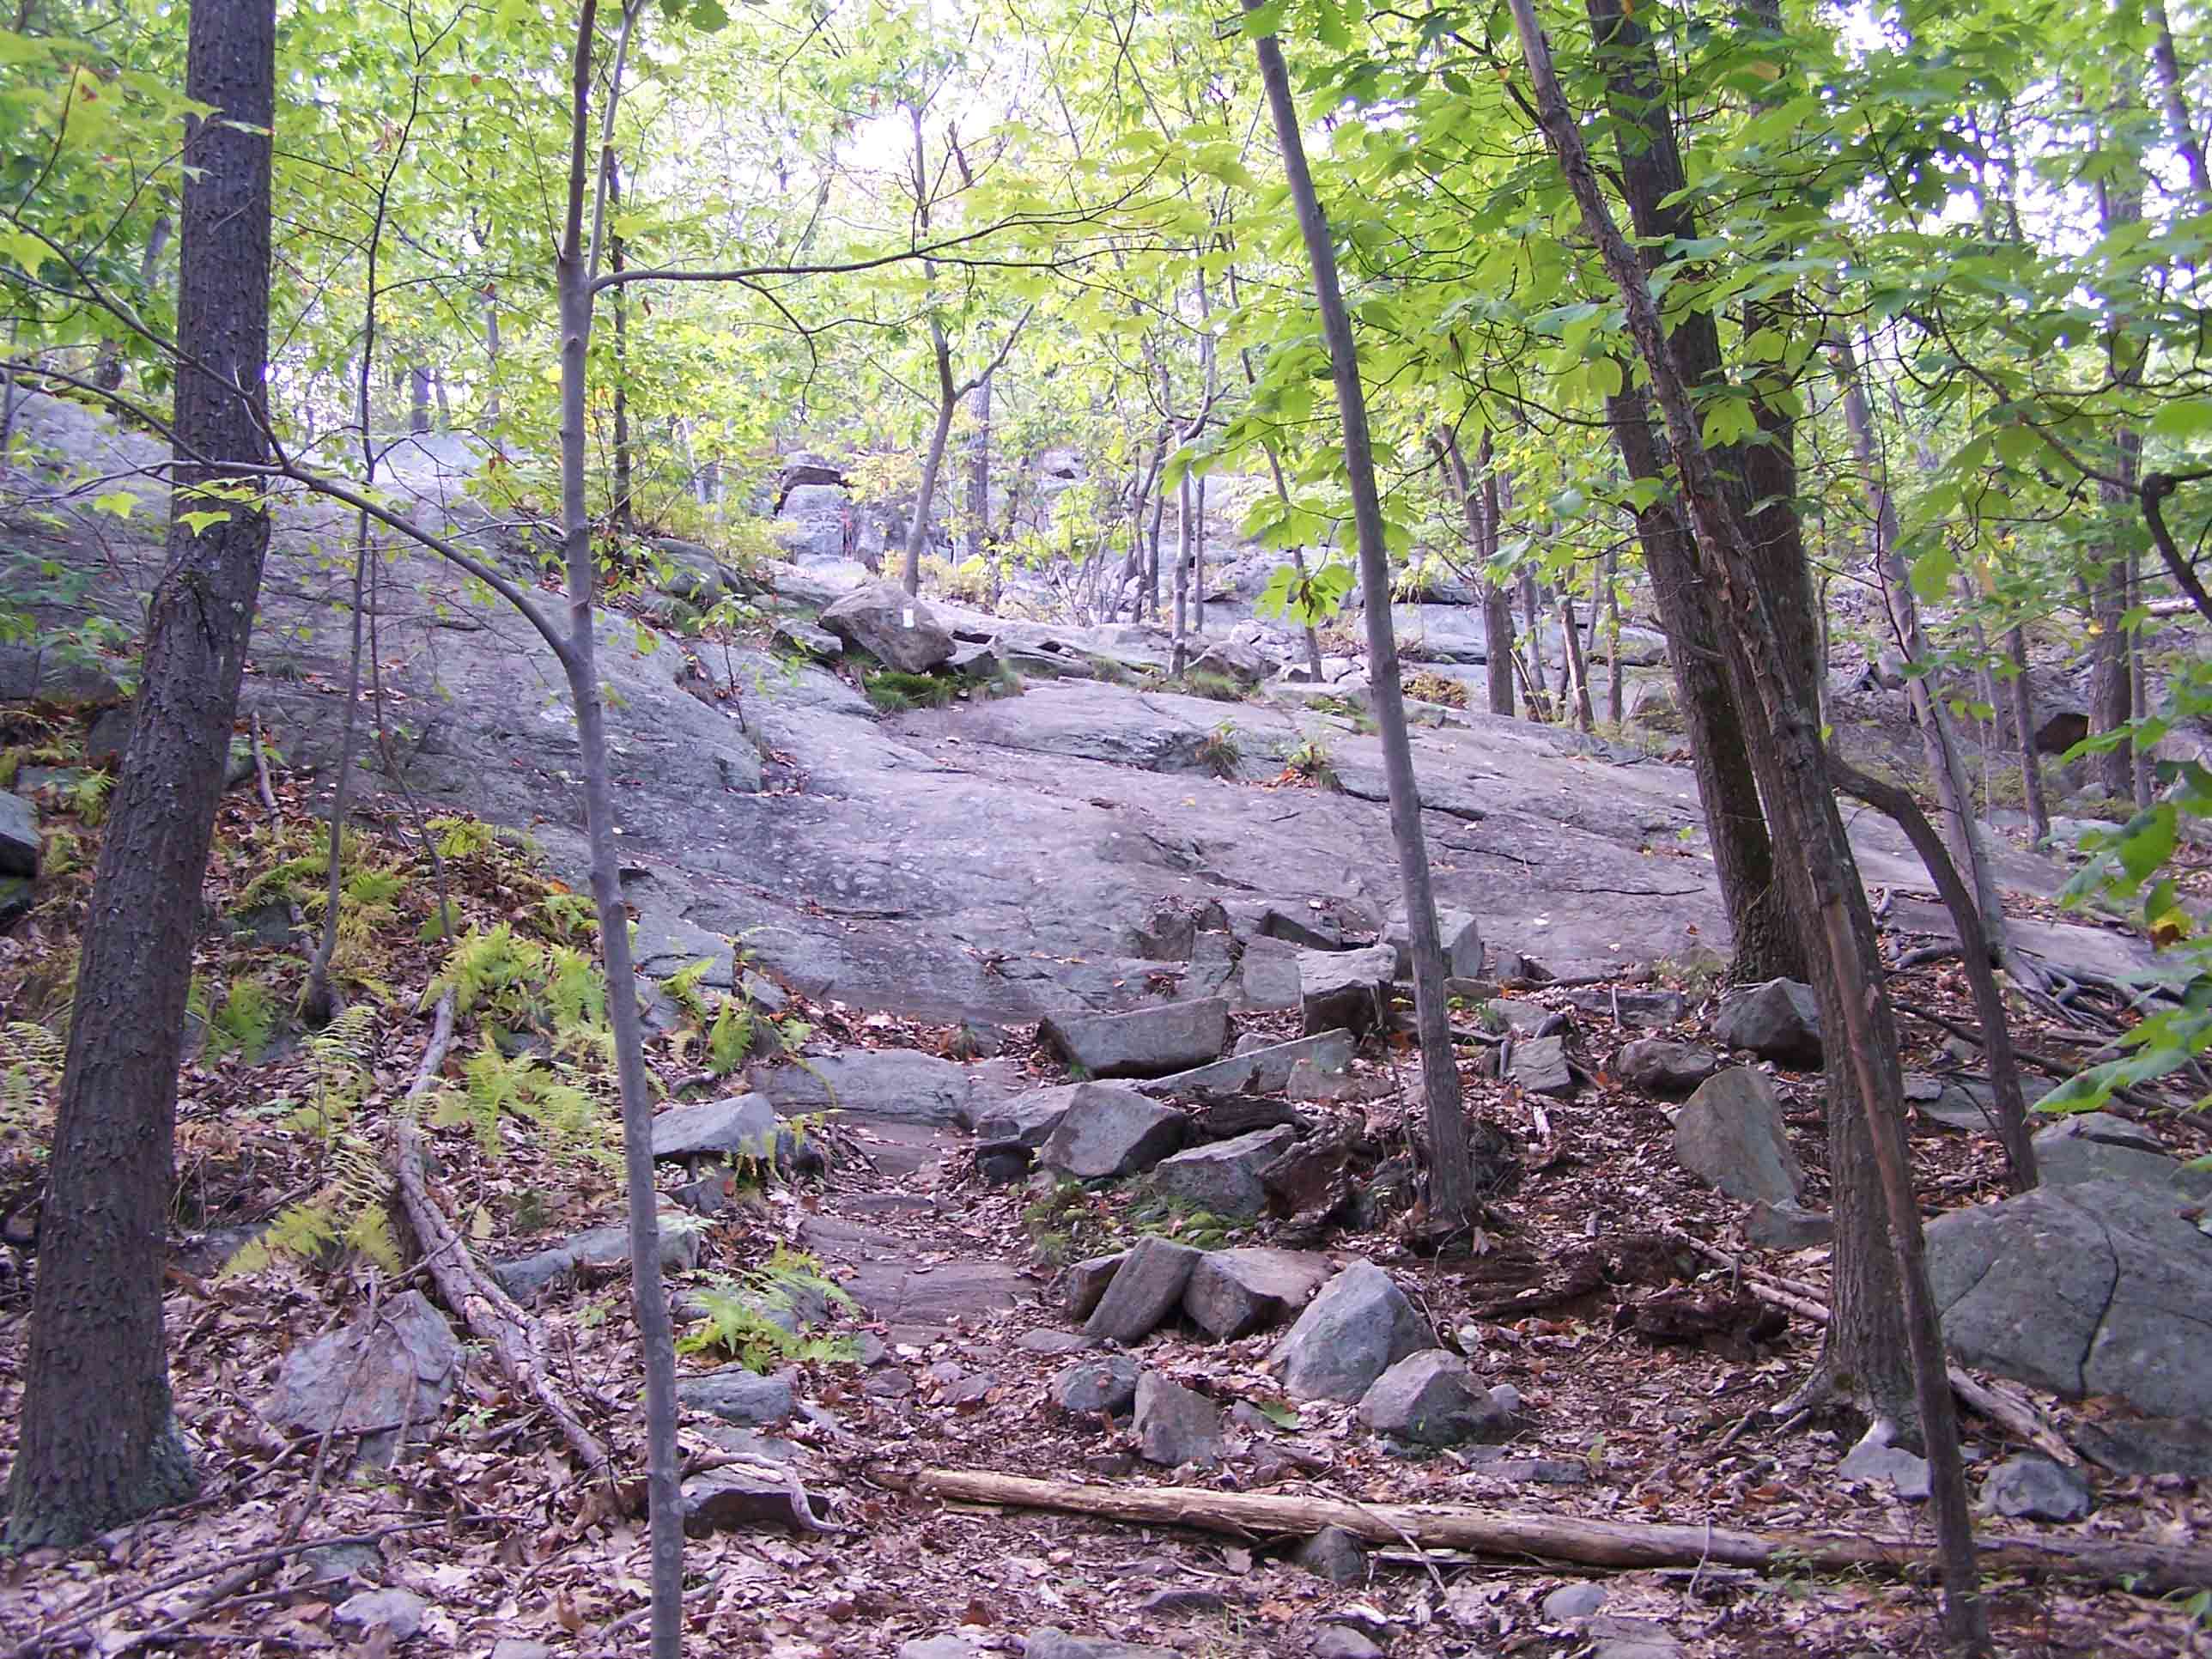 Very rocky trail section. Courtesy at@rohland.org